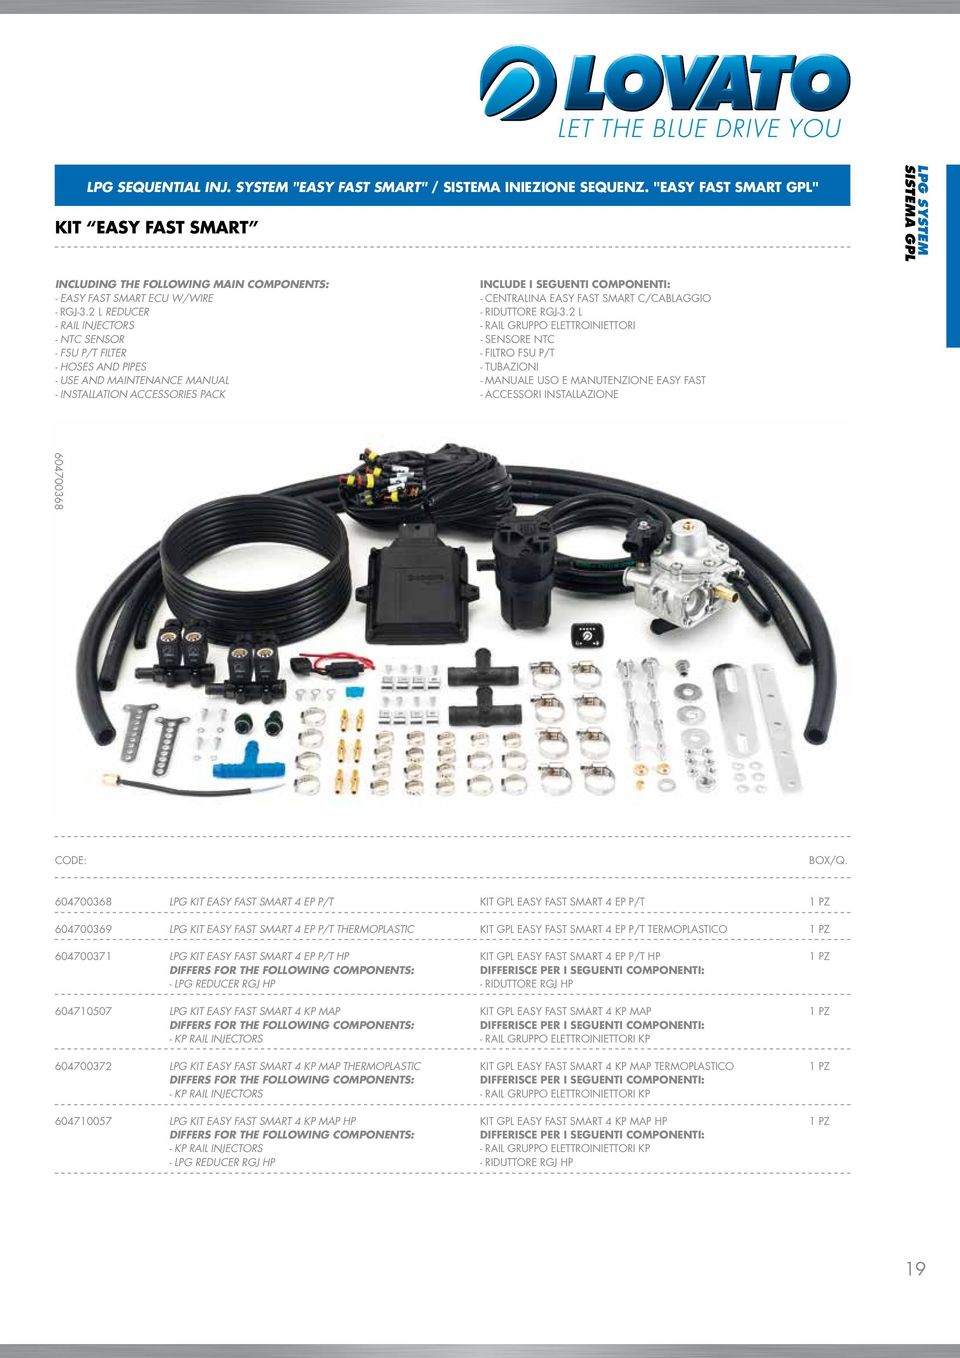 2 L REDUCER - RAIL INJECTORS - NTC SENSOR - FSU P/T FILTER - HOSES AND PIPES - USE AND MAINTENANCE MANUAL - INSTALLATION ACCESSORIES PACK INCLUDE I SEGUENTI COMPONENTI: - CENTRALINA EASY FAST SMART